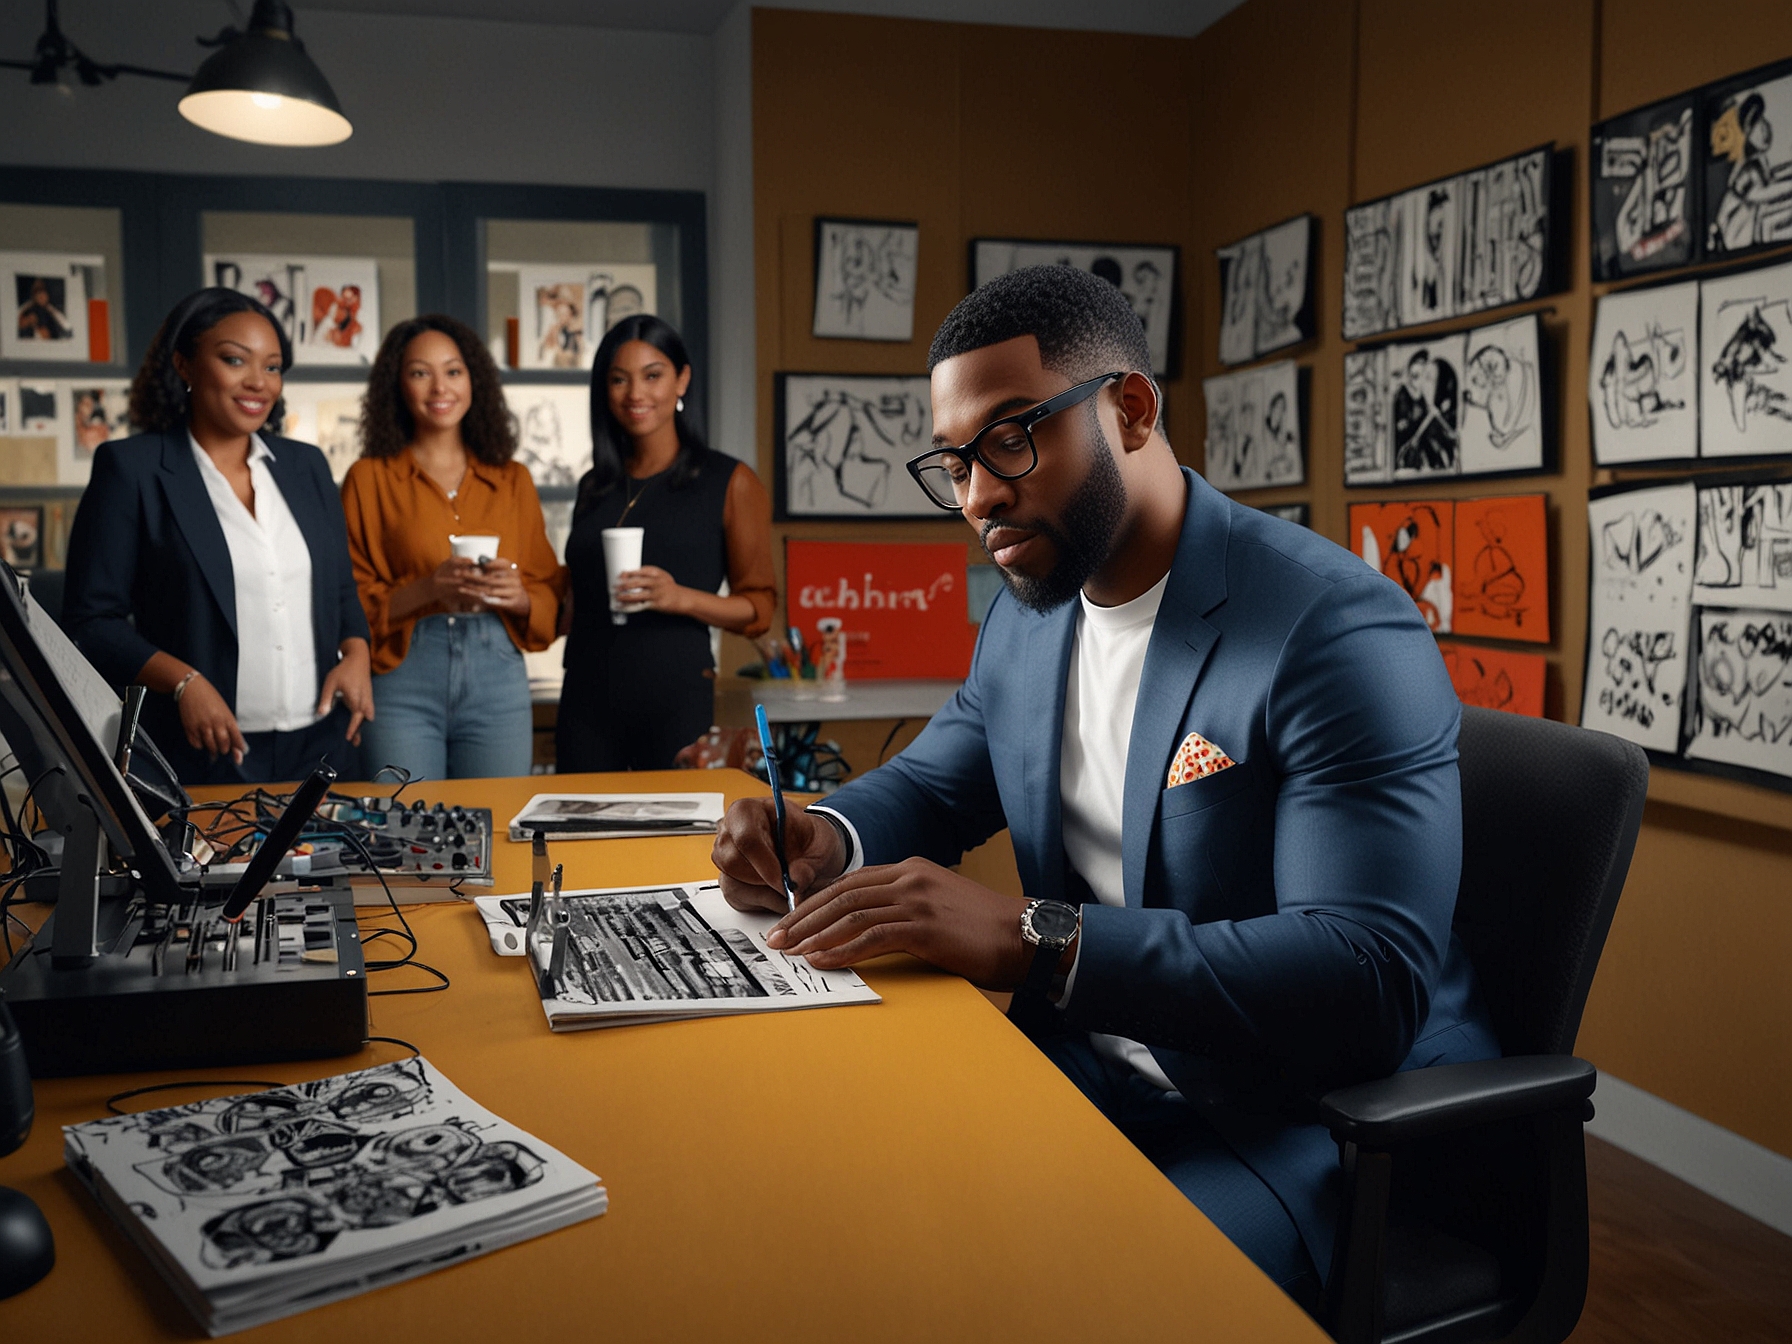 A behind-the-scenes look at a Black creator working on an original series for E!+, highlighting the collaborative spirit and innovative programming intended to resonate with multicultural audiences.